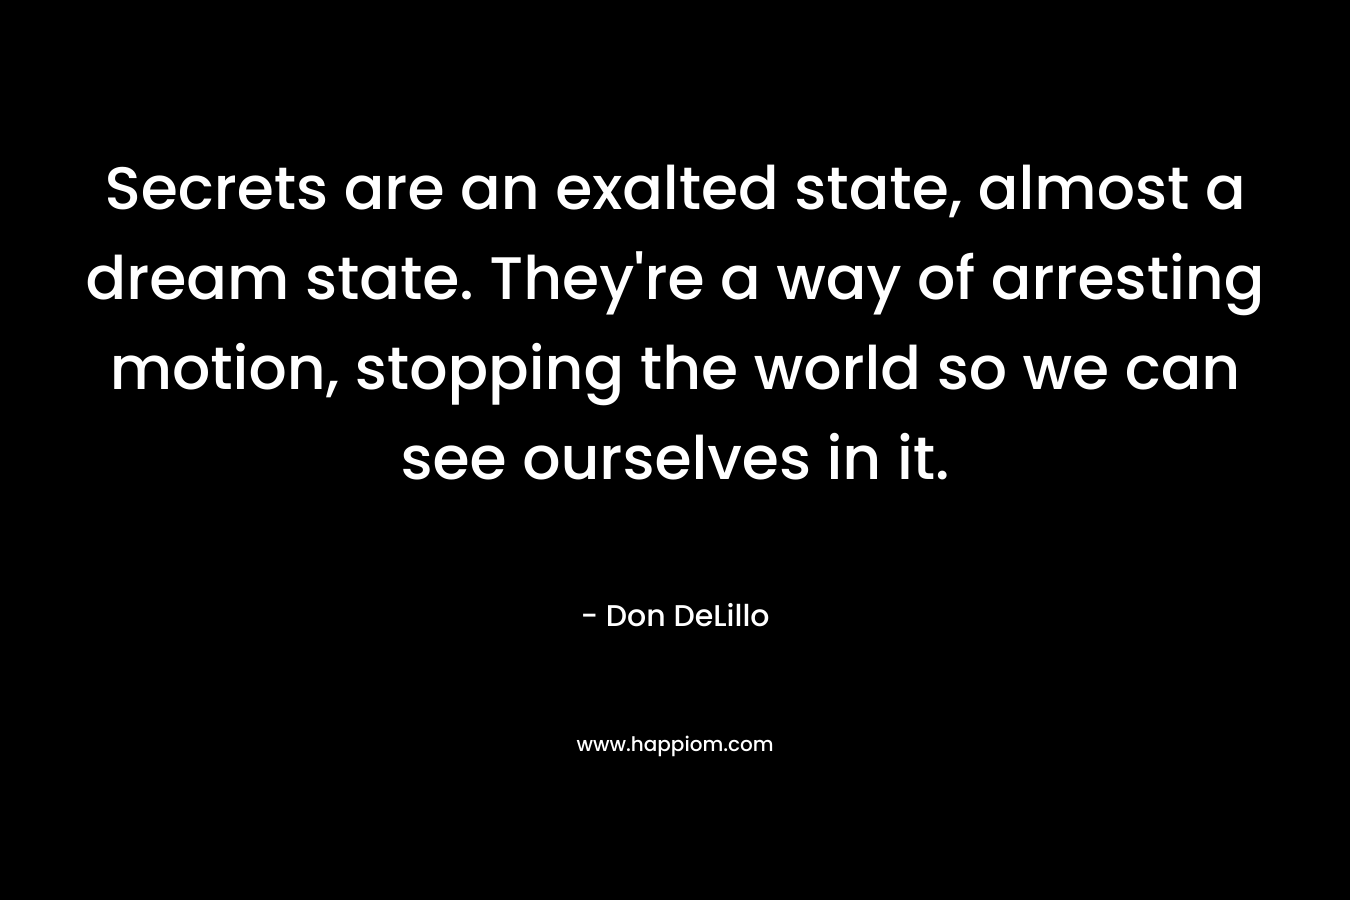 Secrets are an exalted state, almost a dream state. They’re a way of arresting motion, stopping the world so we can see ourselves in it. – Don DeLillo